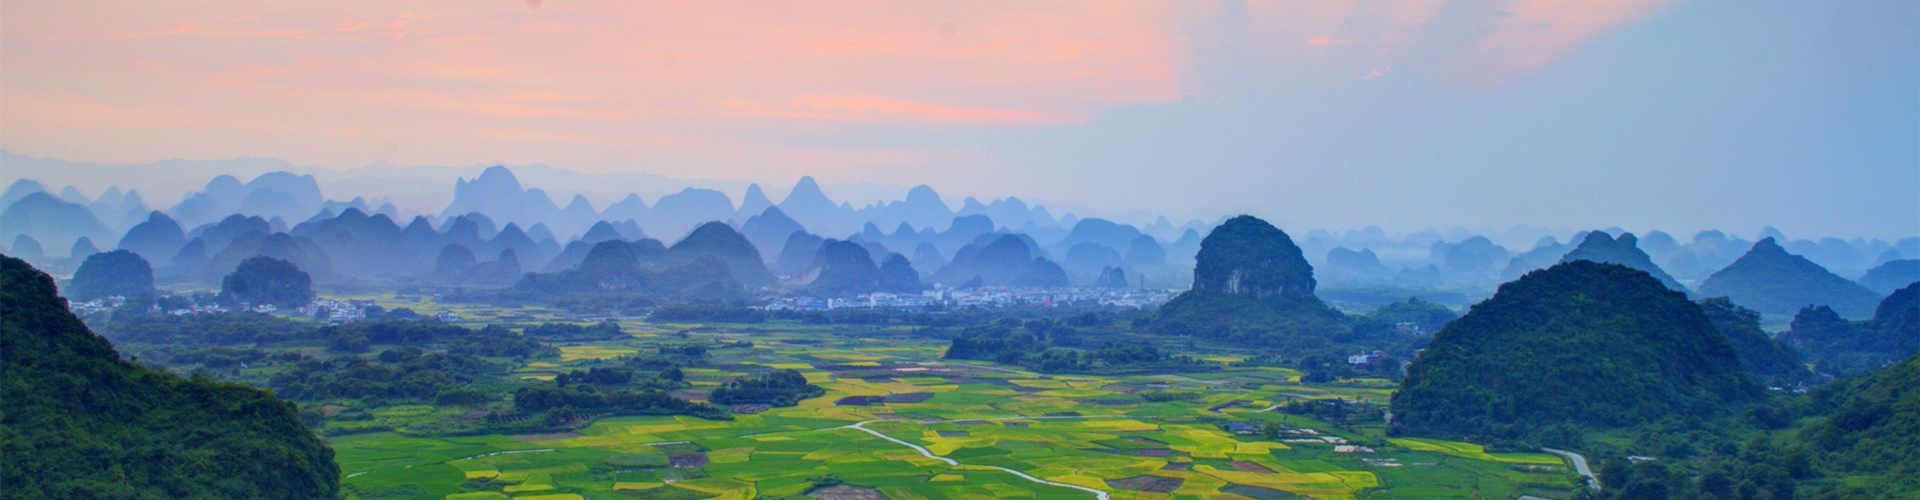 Top 10 Things to Do in Guilin: from Daytime to Nighttime